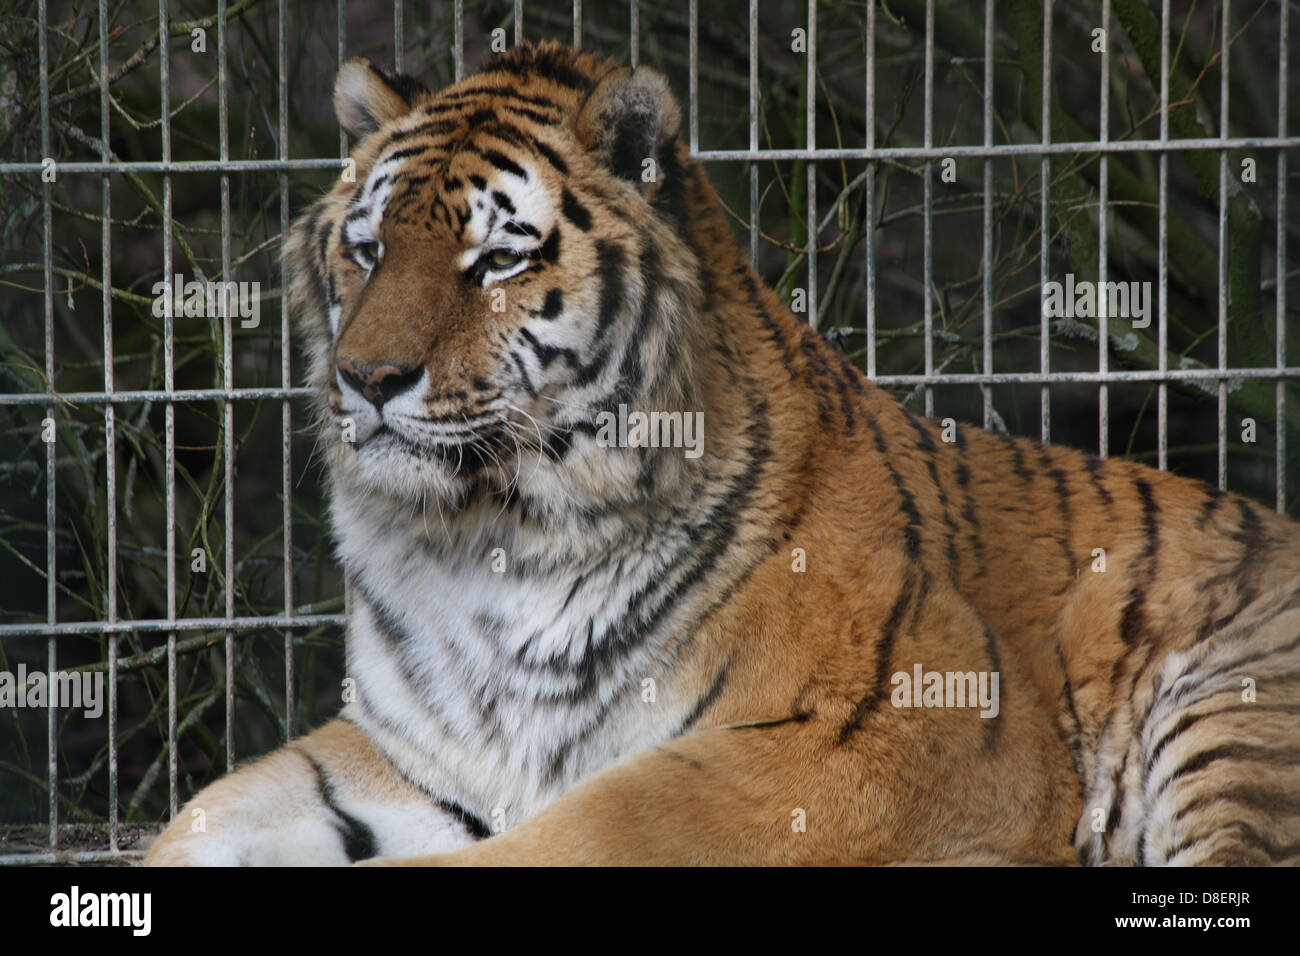 Portrait of a tiger in a zoo enclosure. Stock Photo